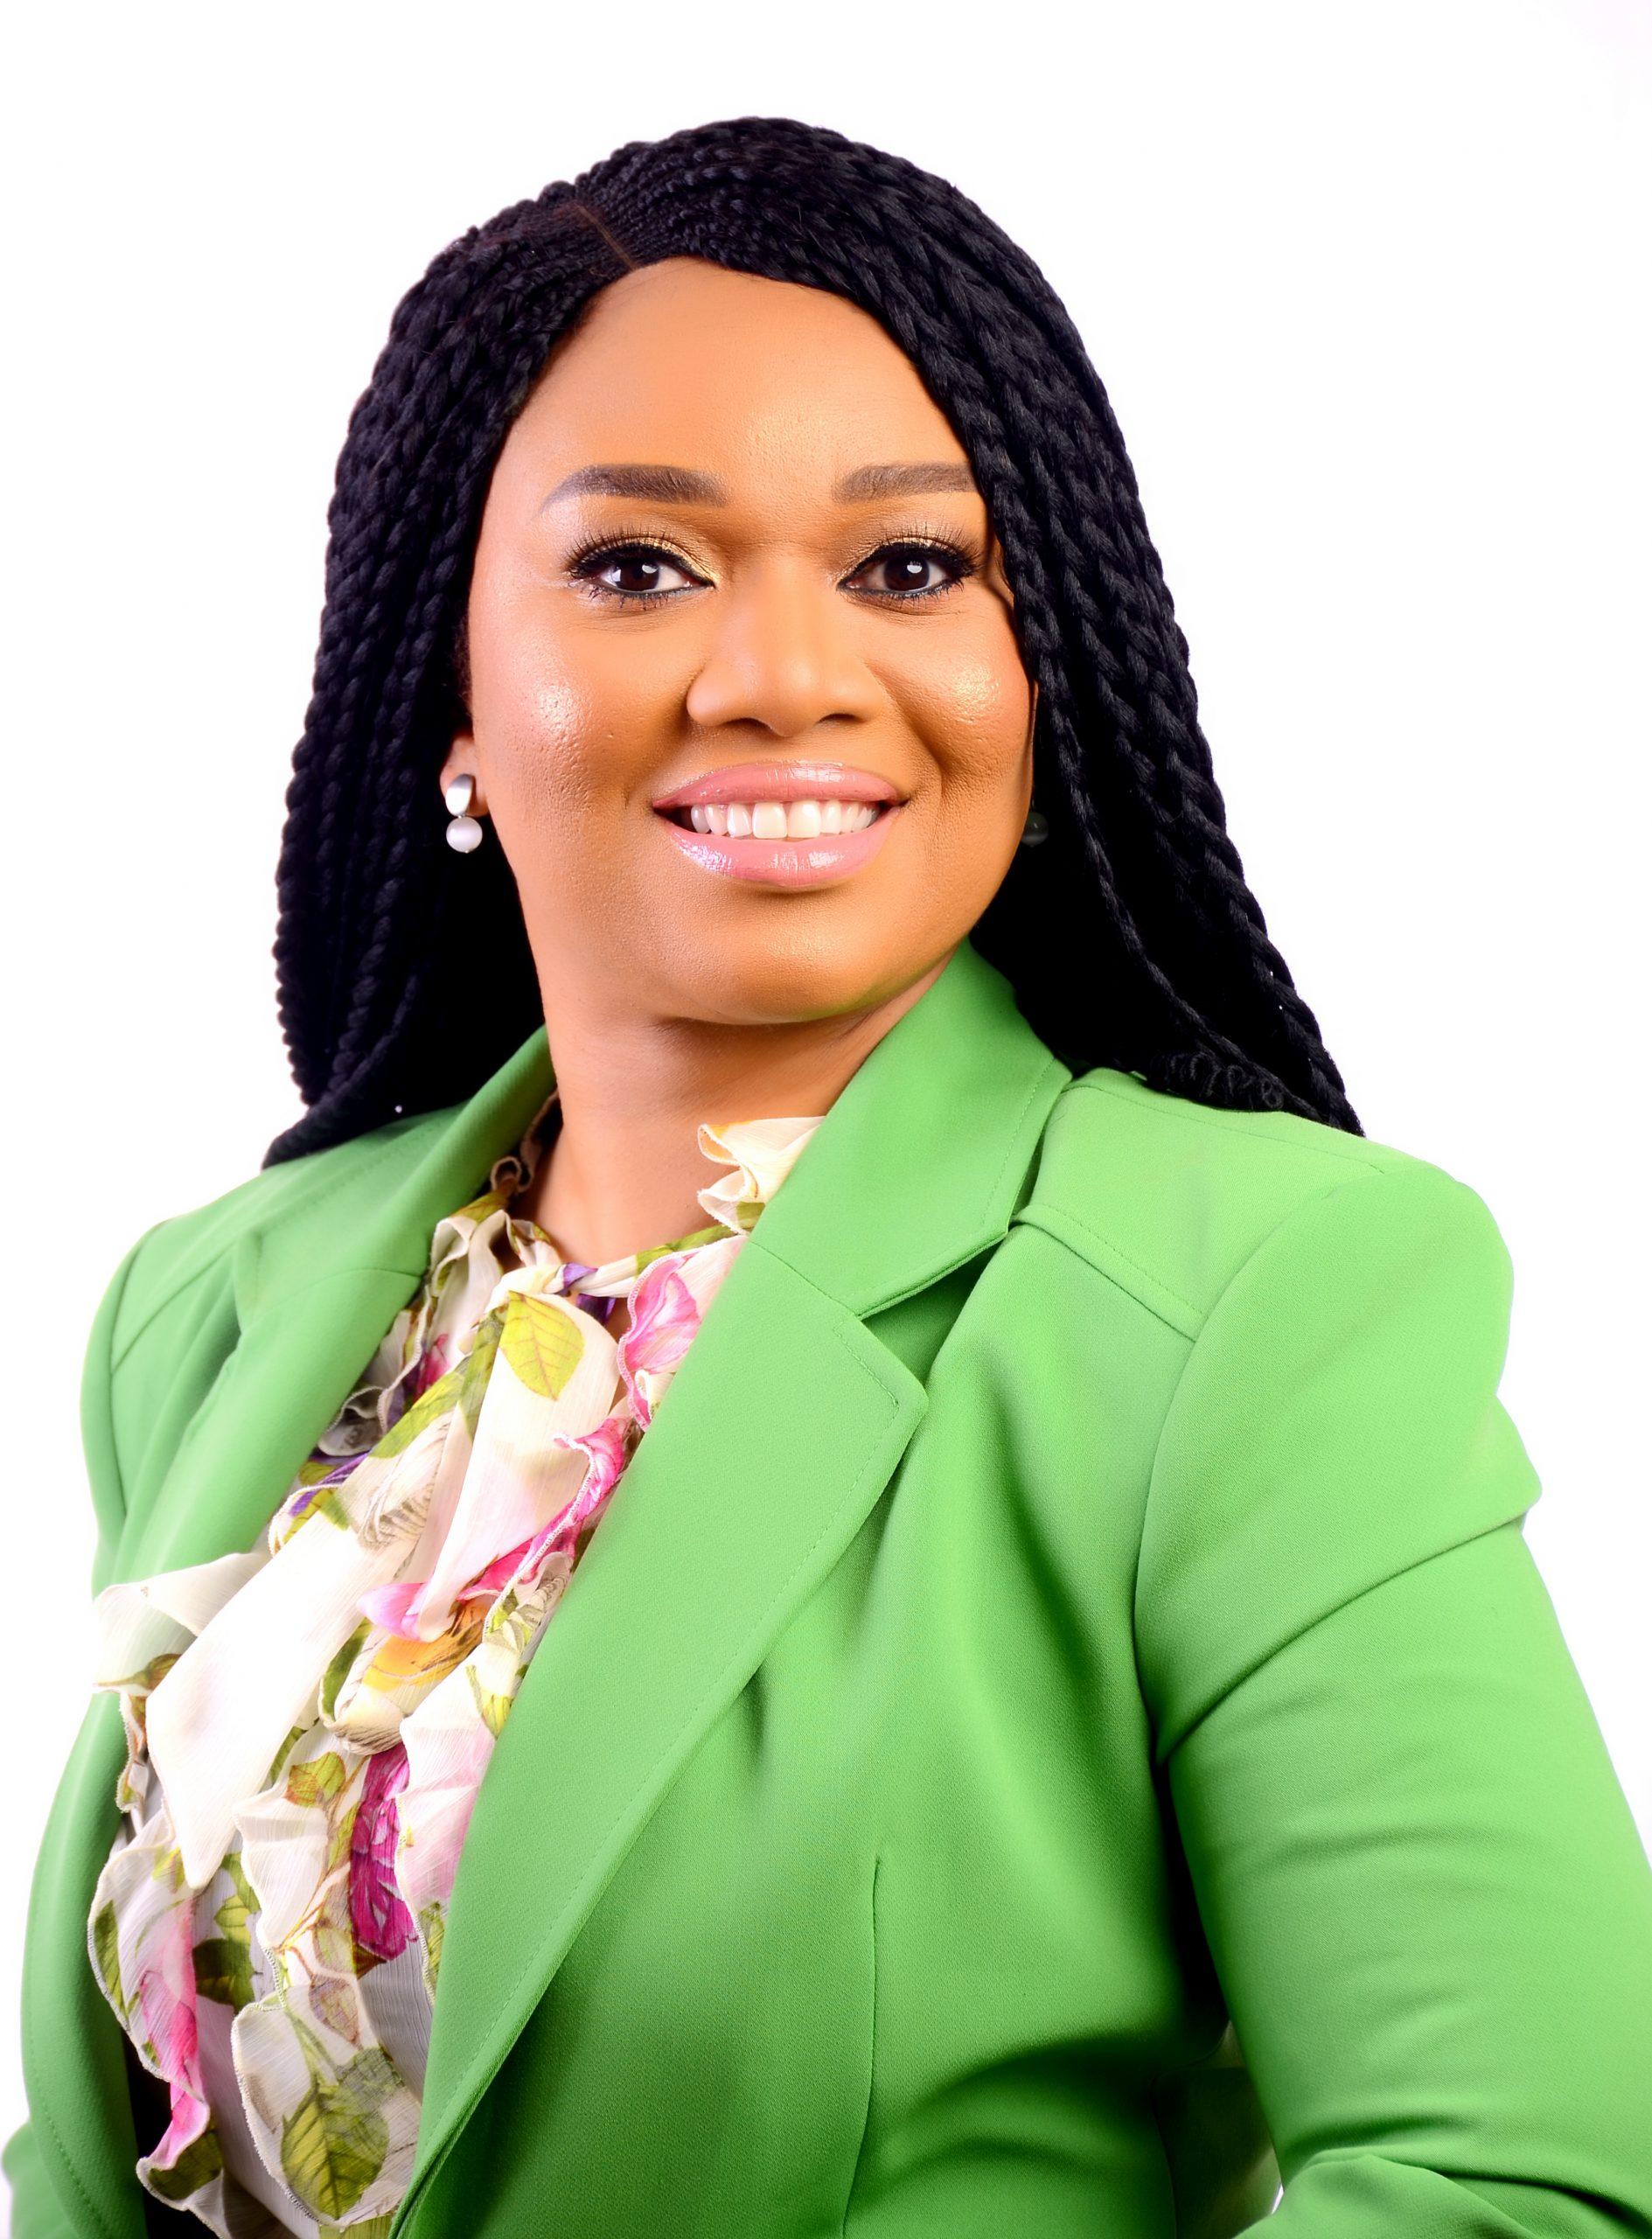 You are currently viewing Understanding unconscious bias in the workplace, by Adaku Okafor